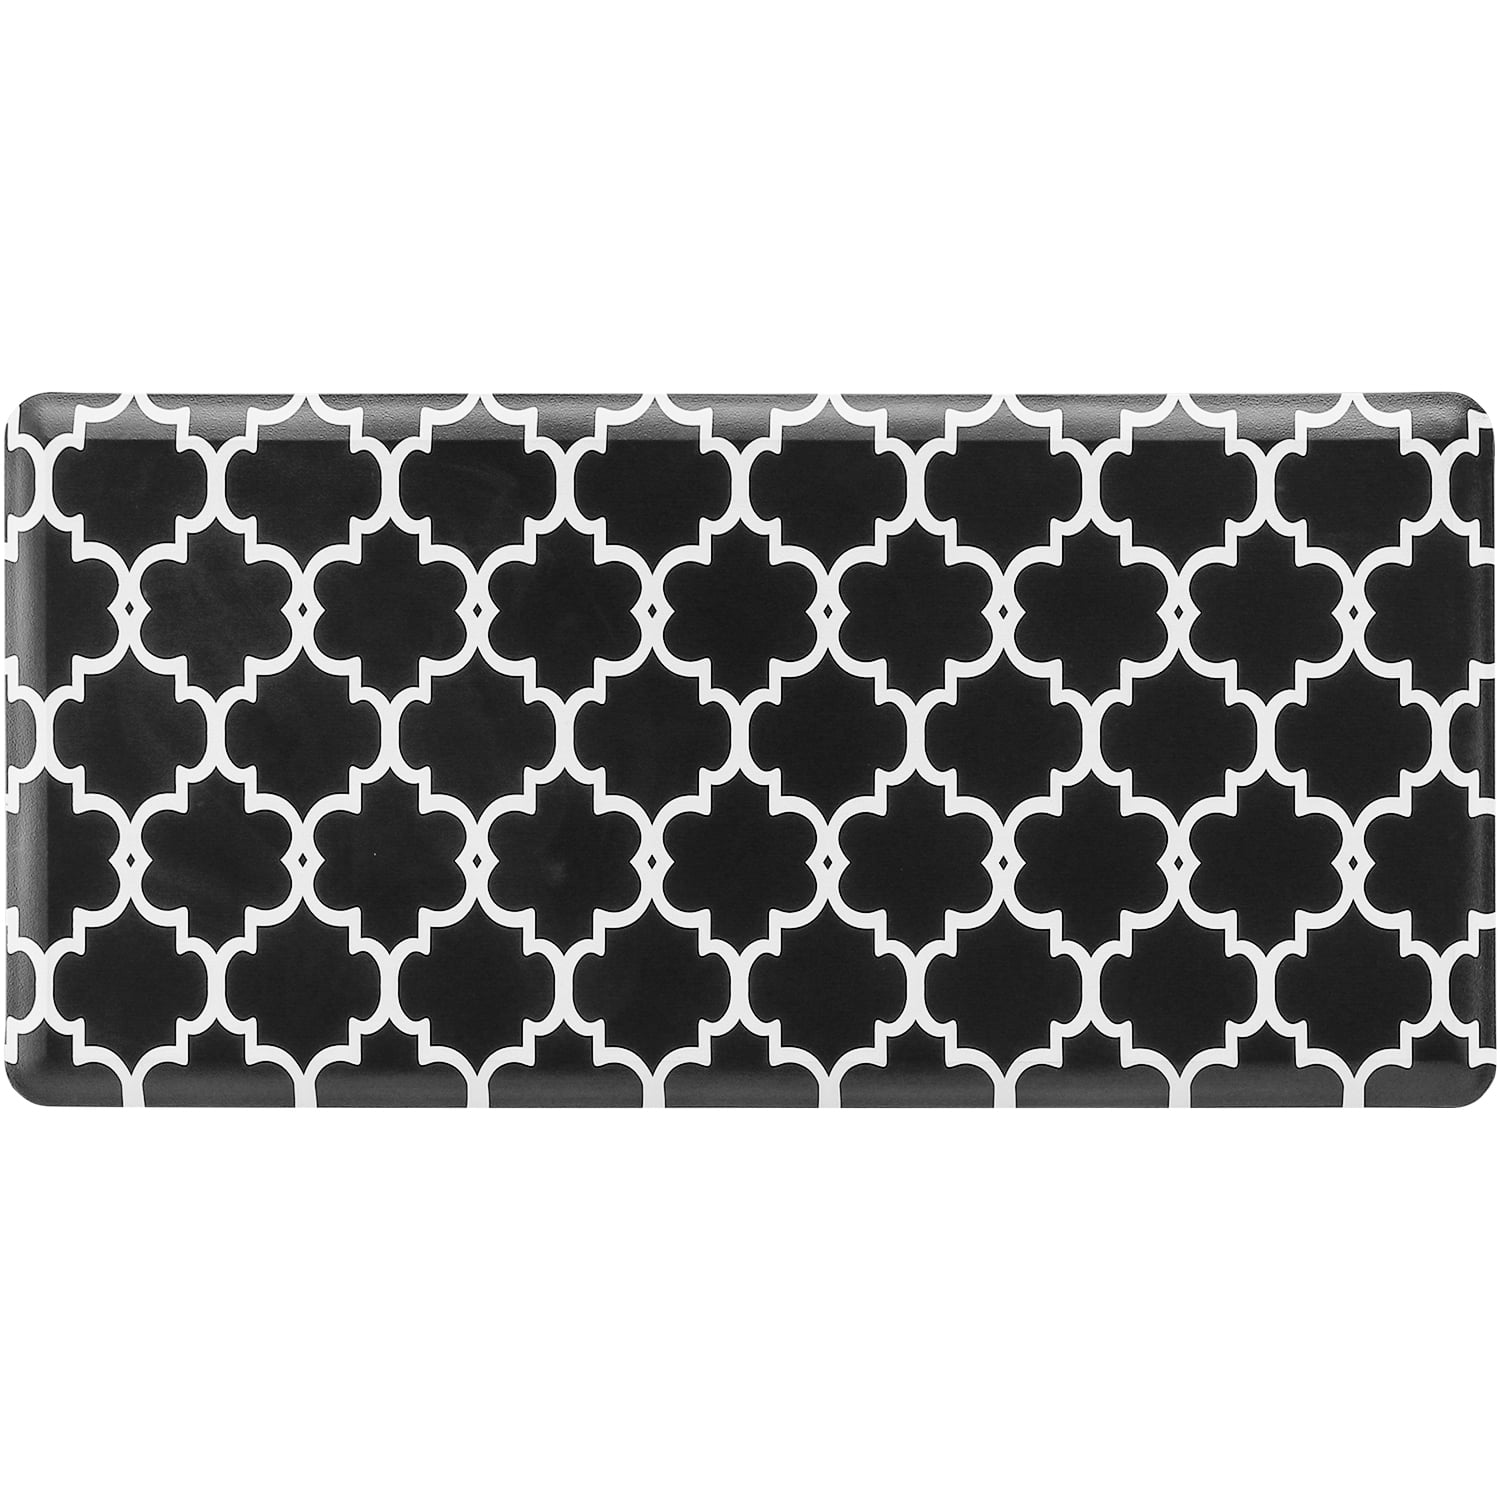 KOKHUB Kitchen Mats and Kitchen Rugs 2 Pieces Black and White, 17